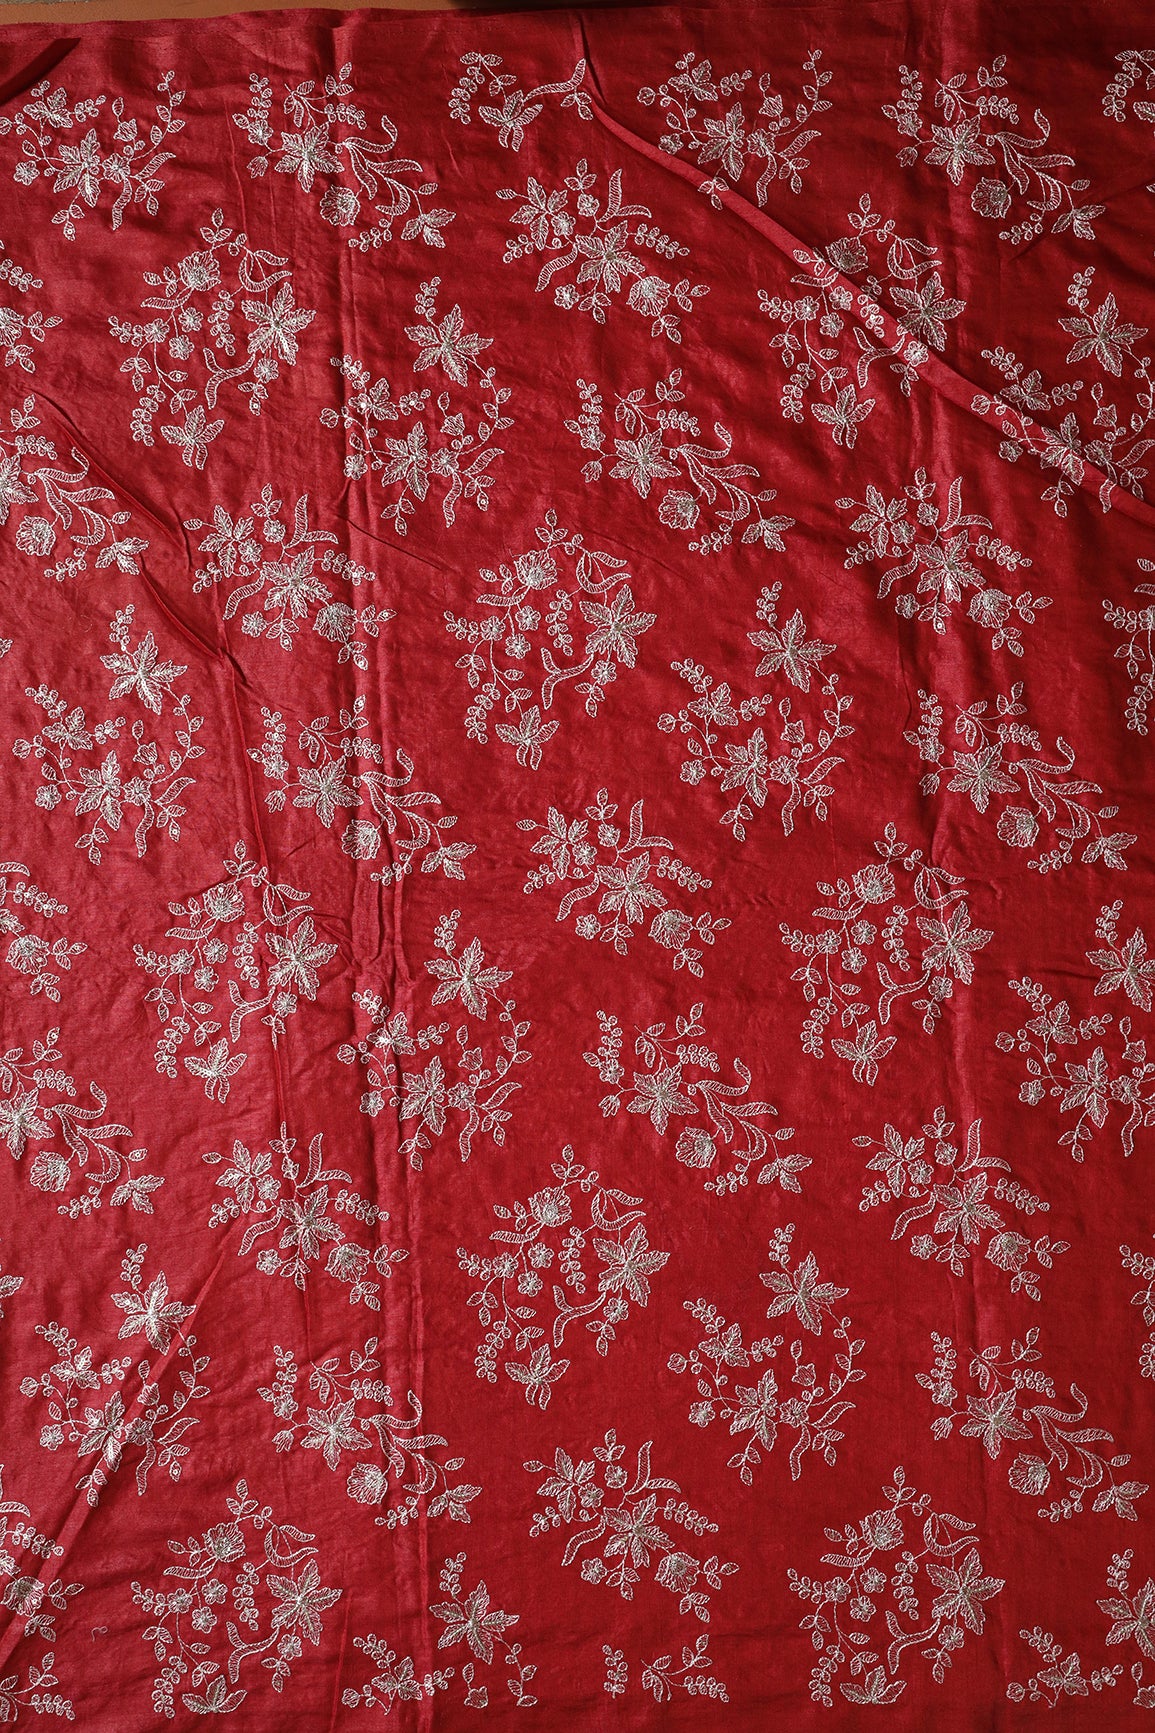 White Thread With Gold Sequins Floral Embroidery On Fire Brick Red Pure Bamboo Silk Fabric